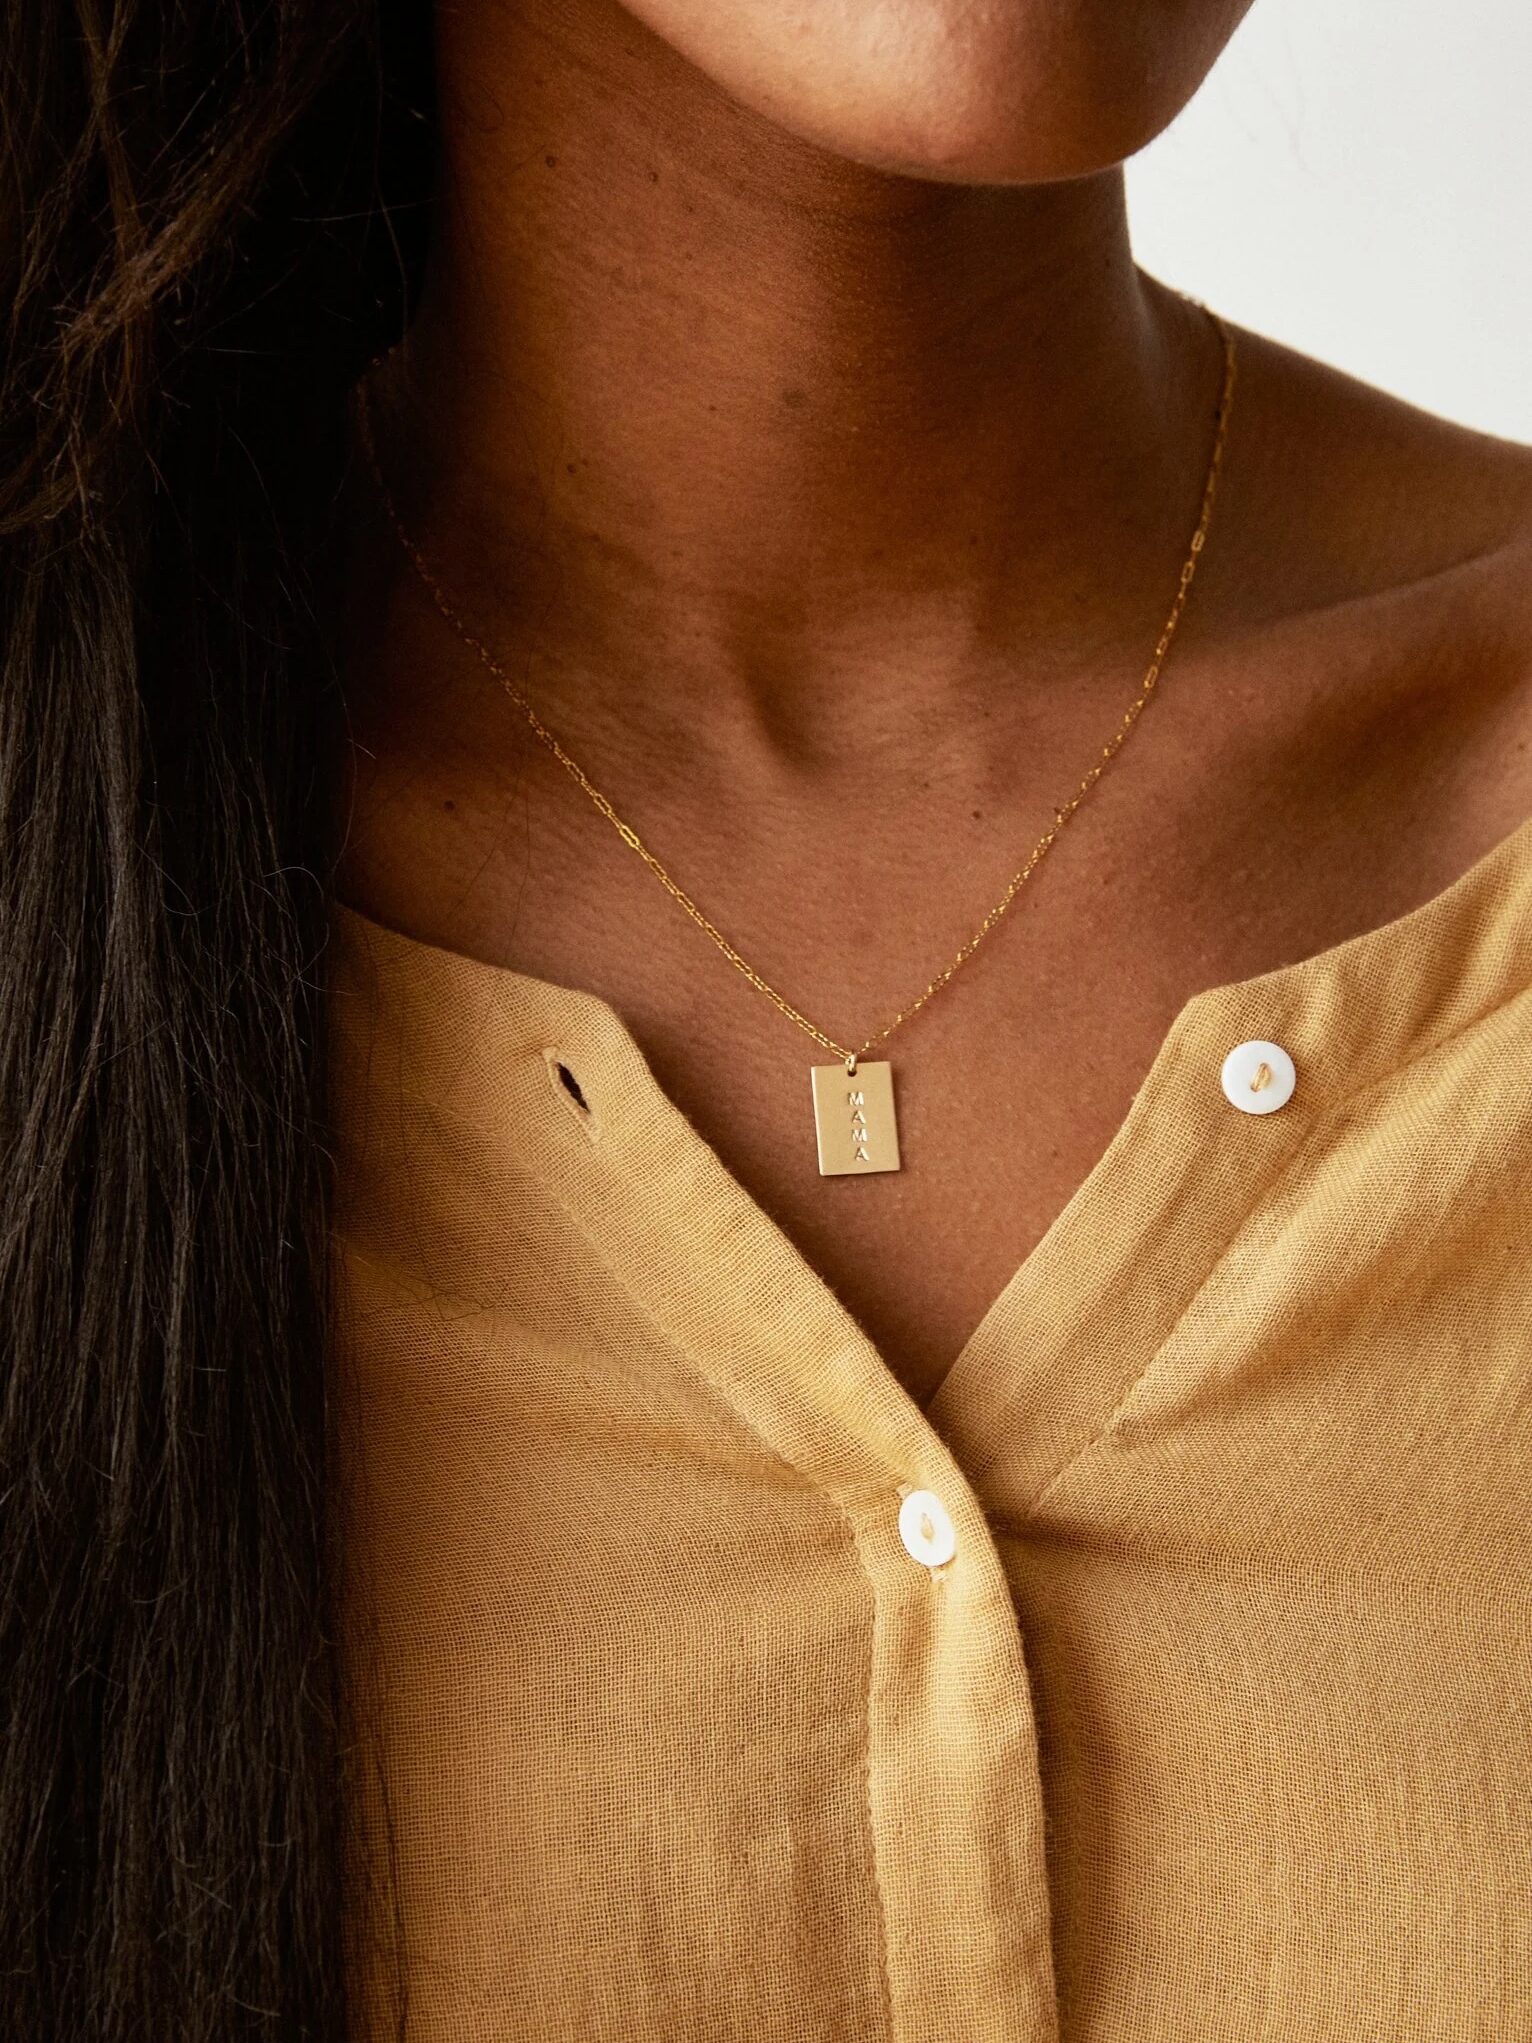 ABLE necklace on a model's neck